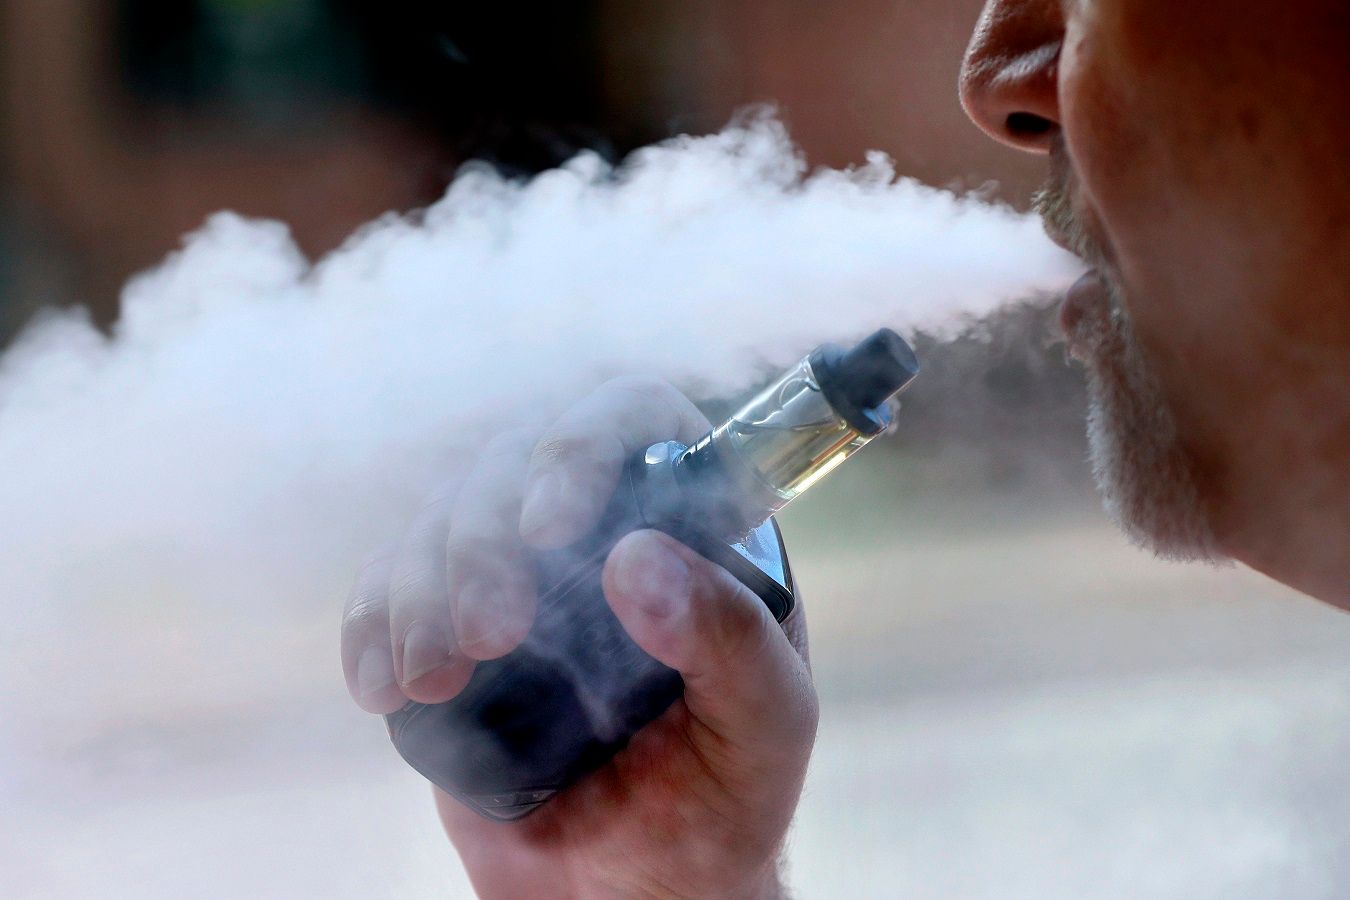 Alberta government to review vaping rules as number of young users grows 